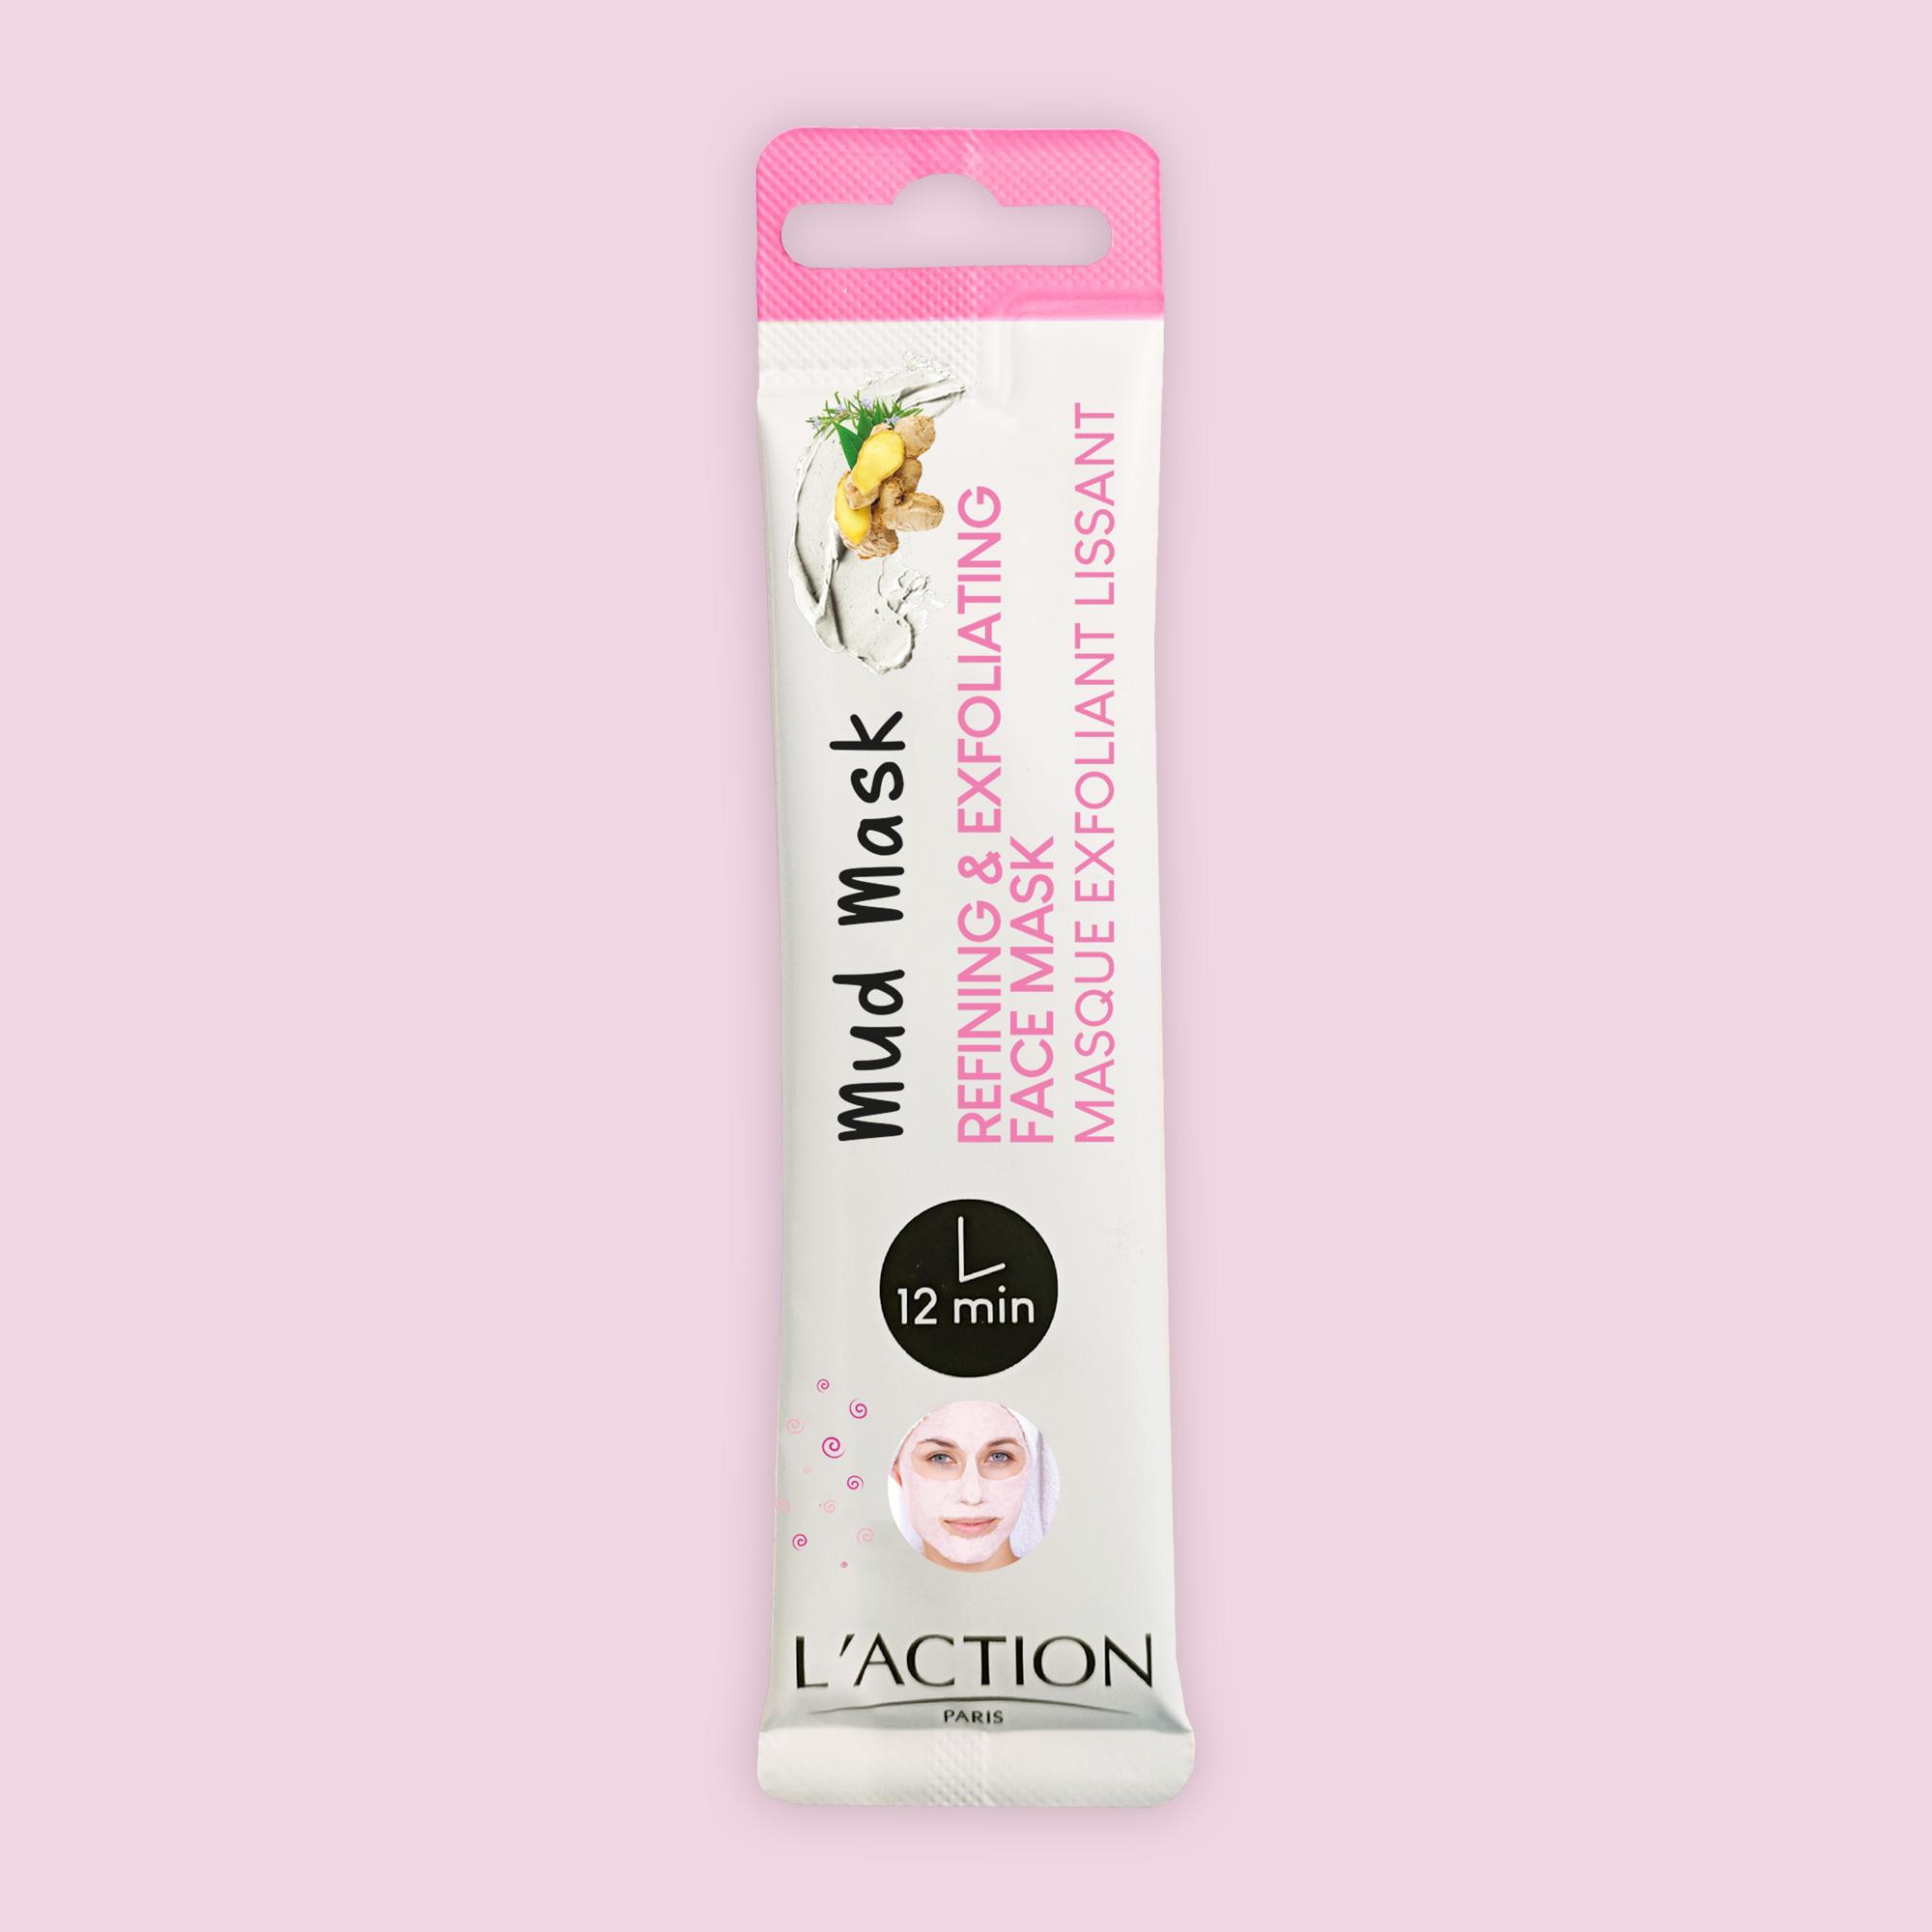 Refining face mask – L'Action